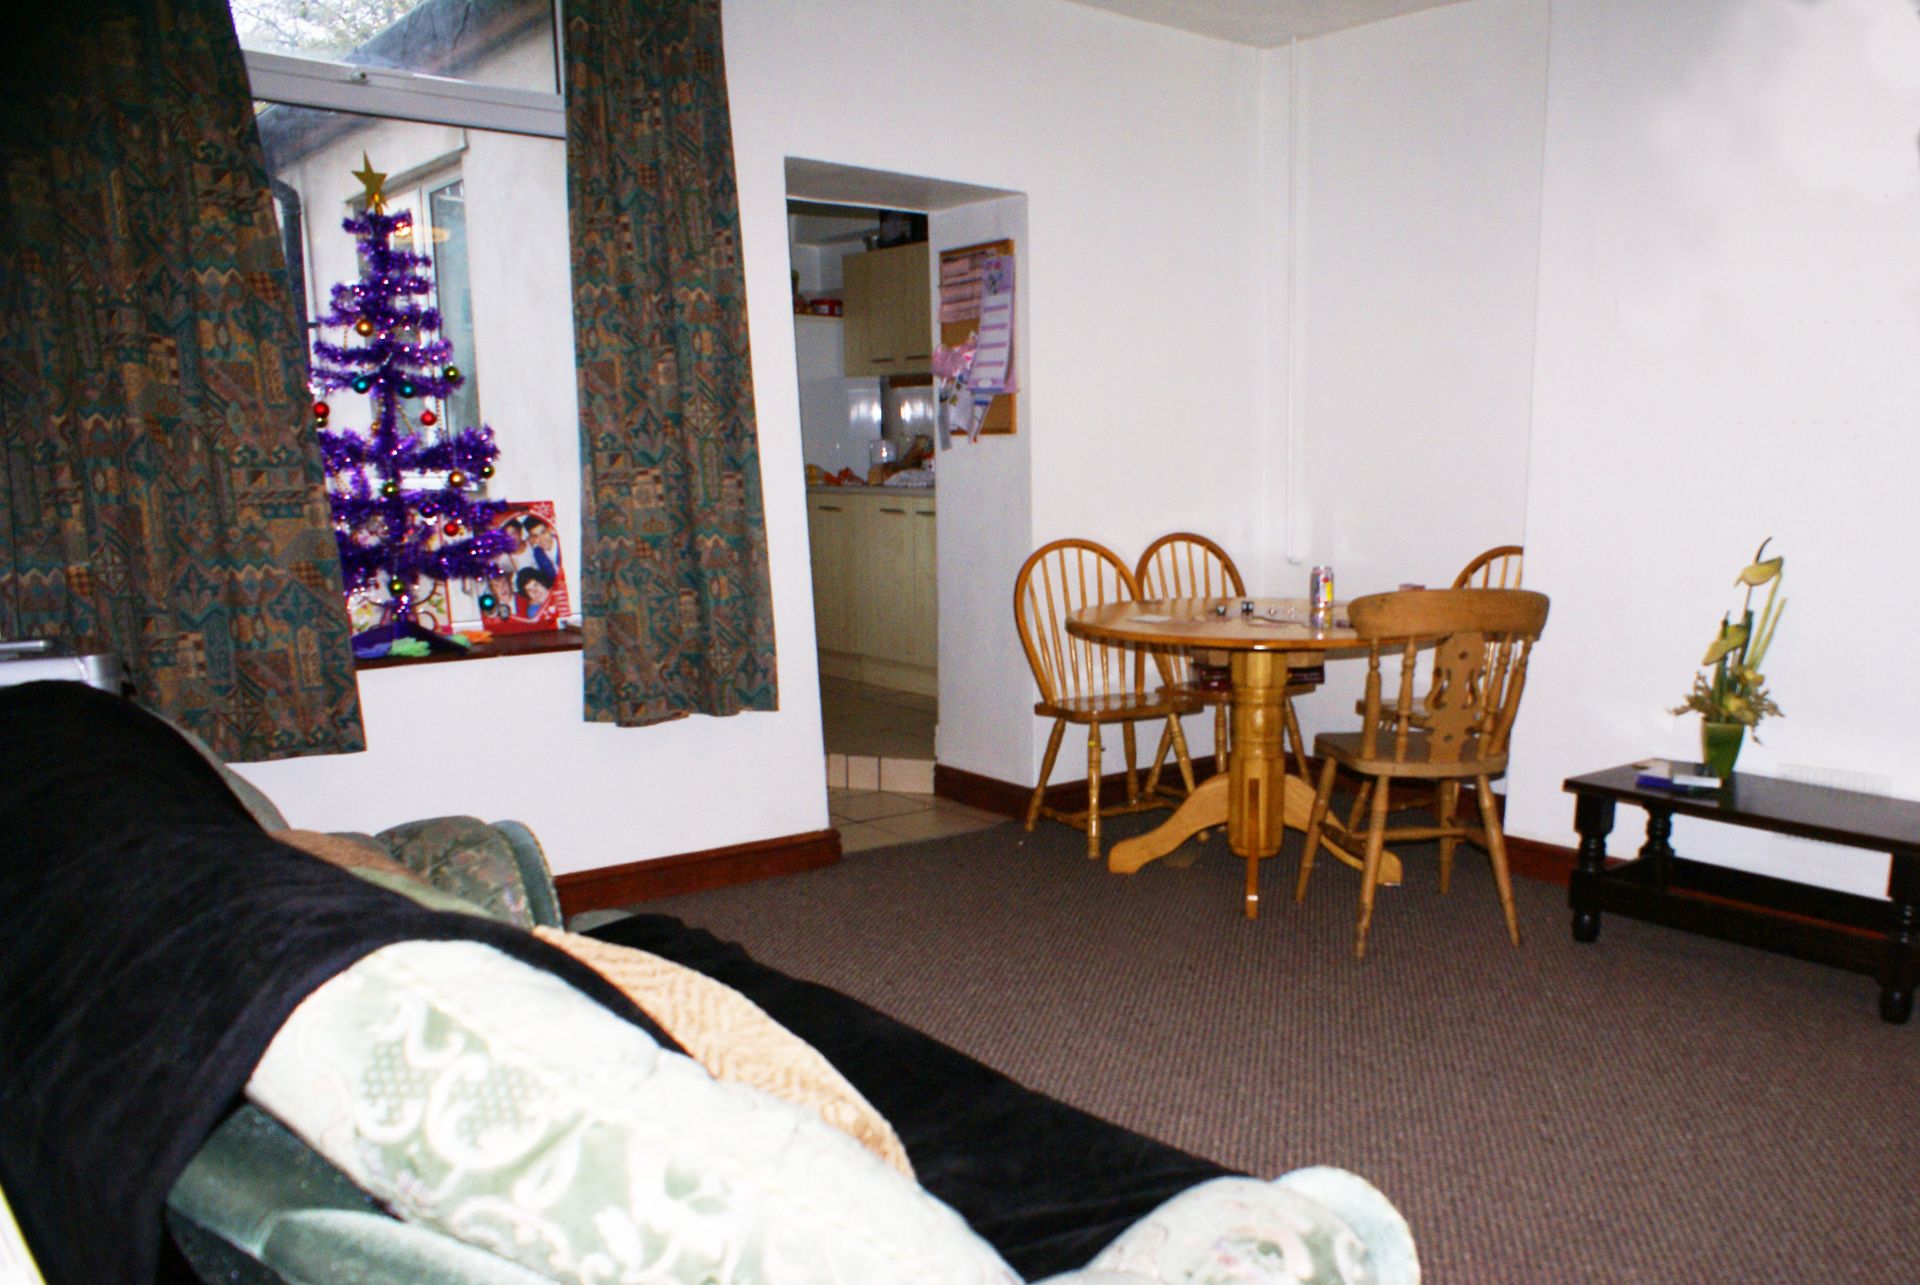 University Student Accommodation 3 bed house in Lancaster lounge